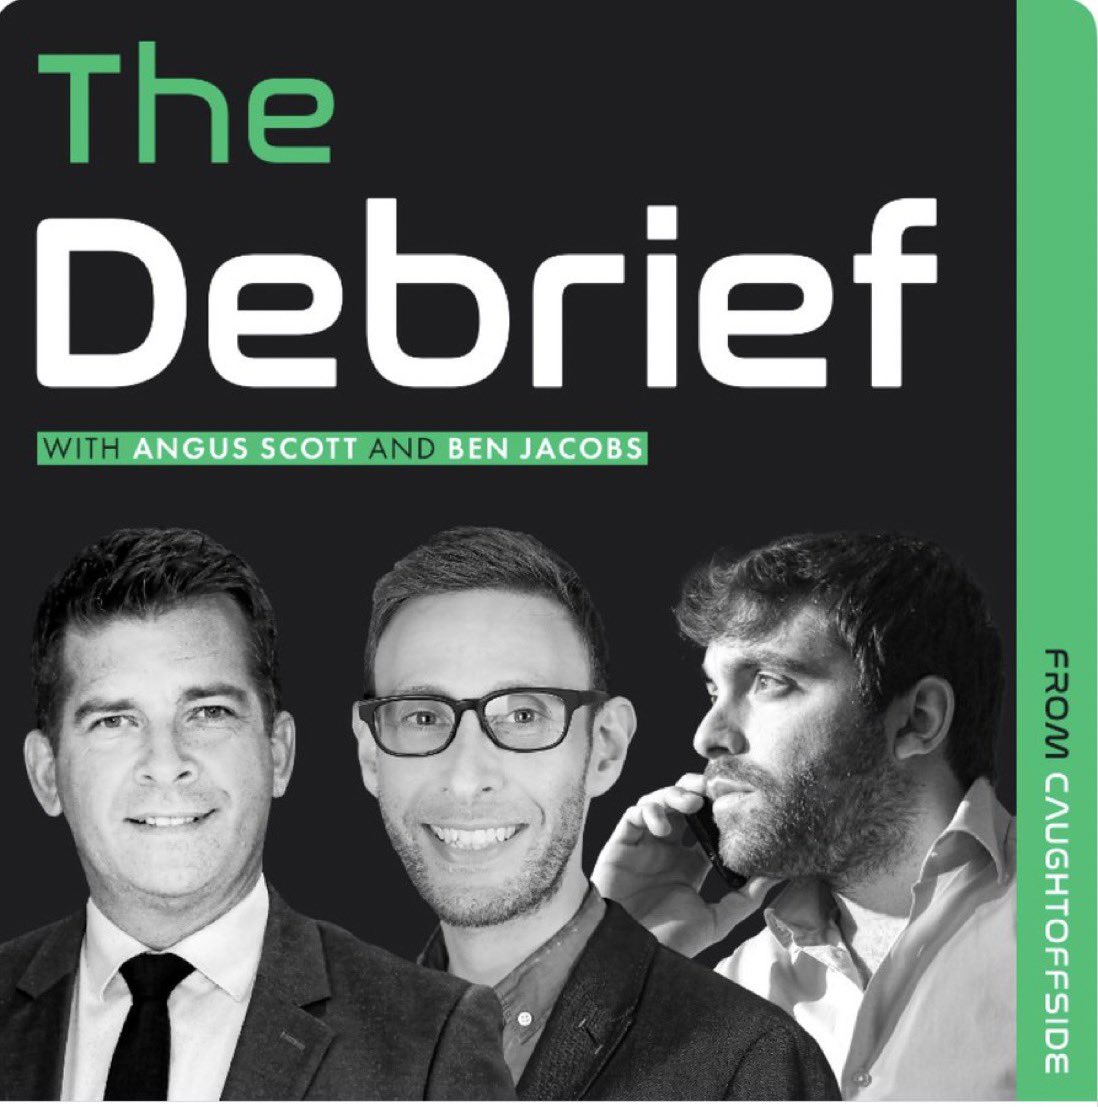 Debrief is live on @caughtoffside from 13:45. We’re talking Kylian Mbappe and his expected move to Real Madrid.⚪️ Myself and @AngusScott are joined by @FabrizioRomano and @Jon_LeGossip.🎙️